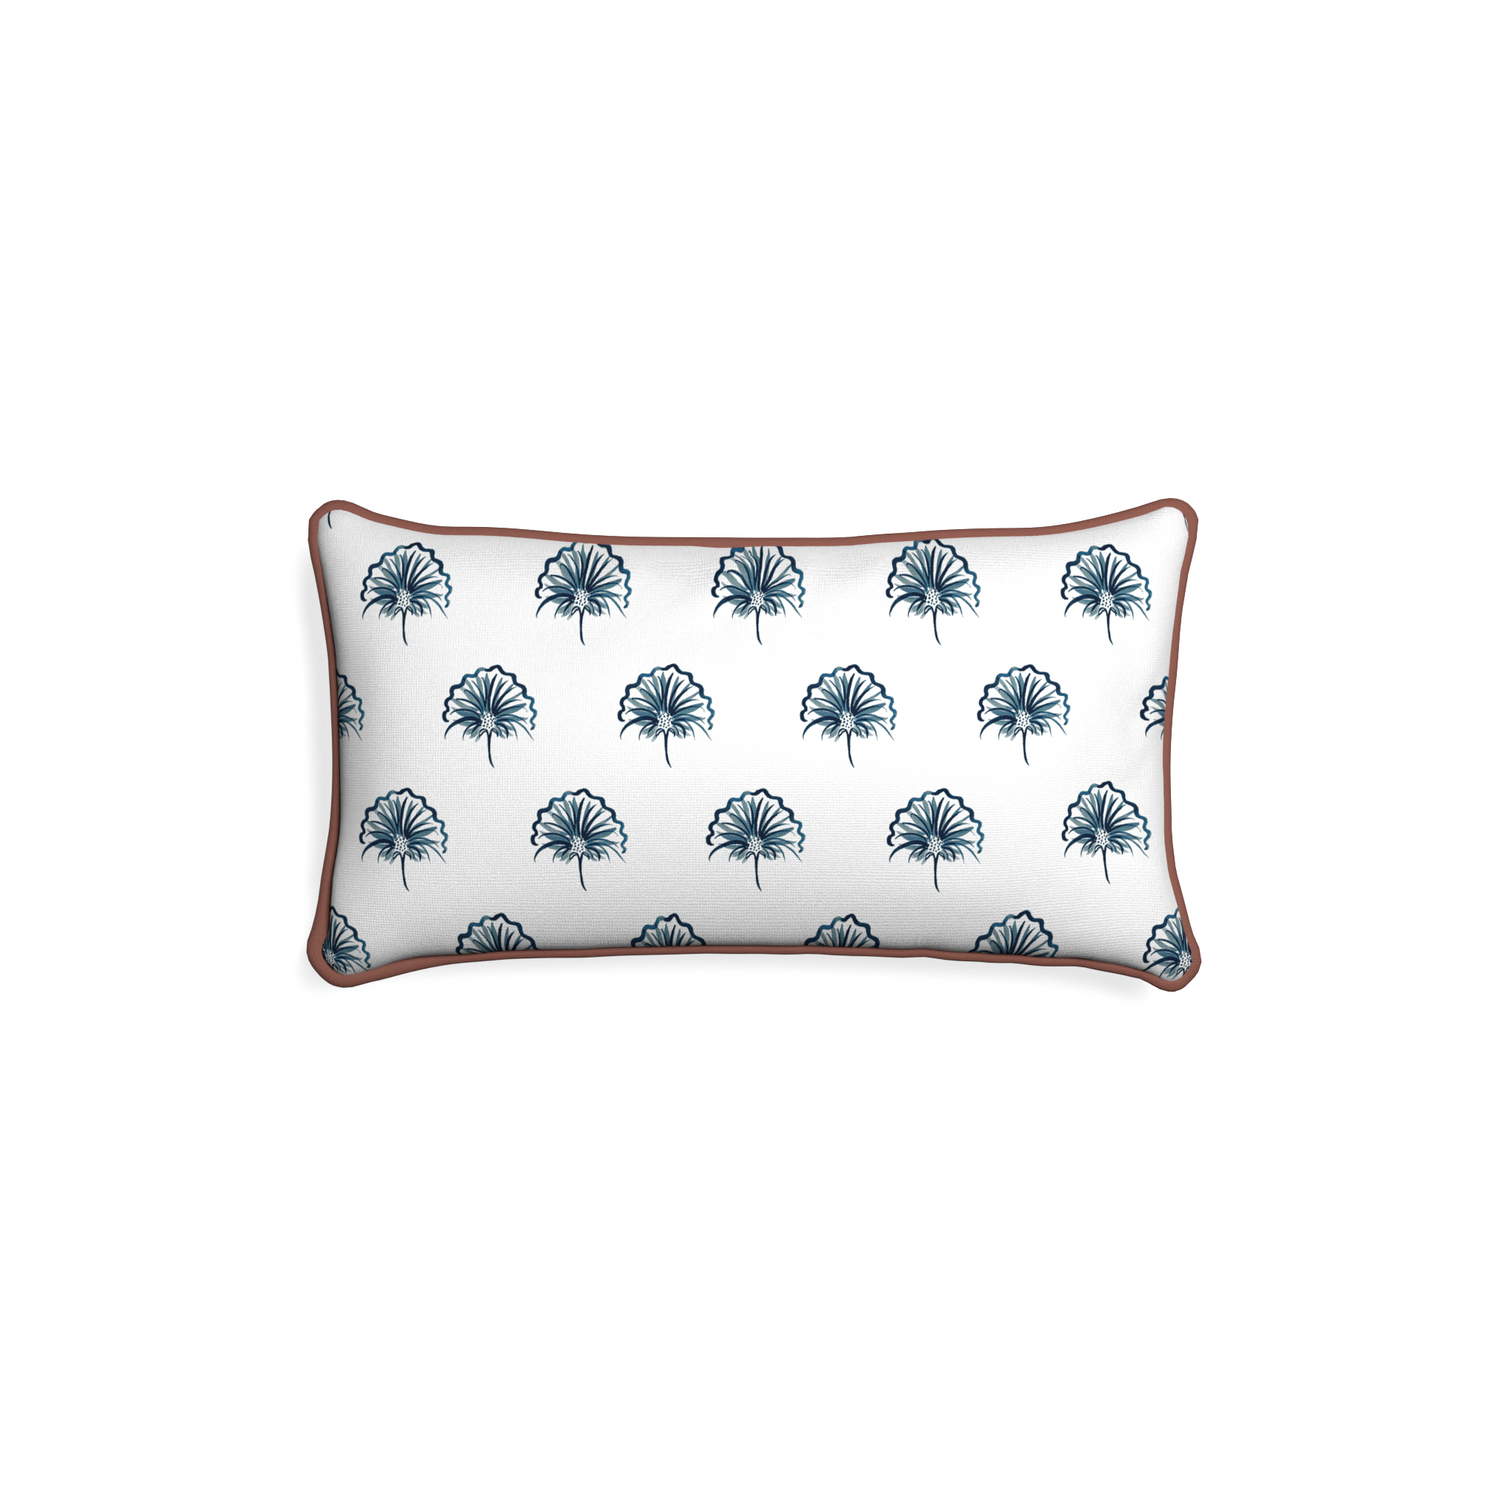 Petite-lumbar penelope midnight custom floral navypillow with w piping on white background